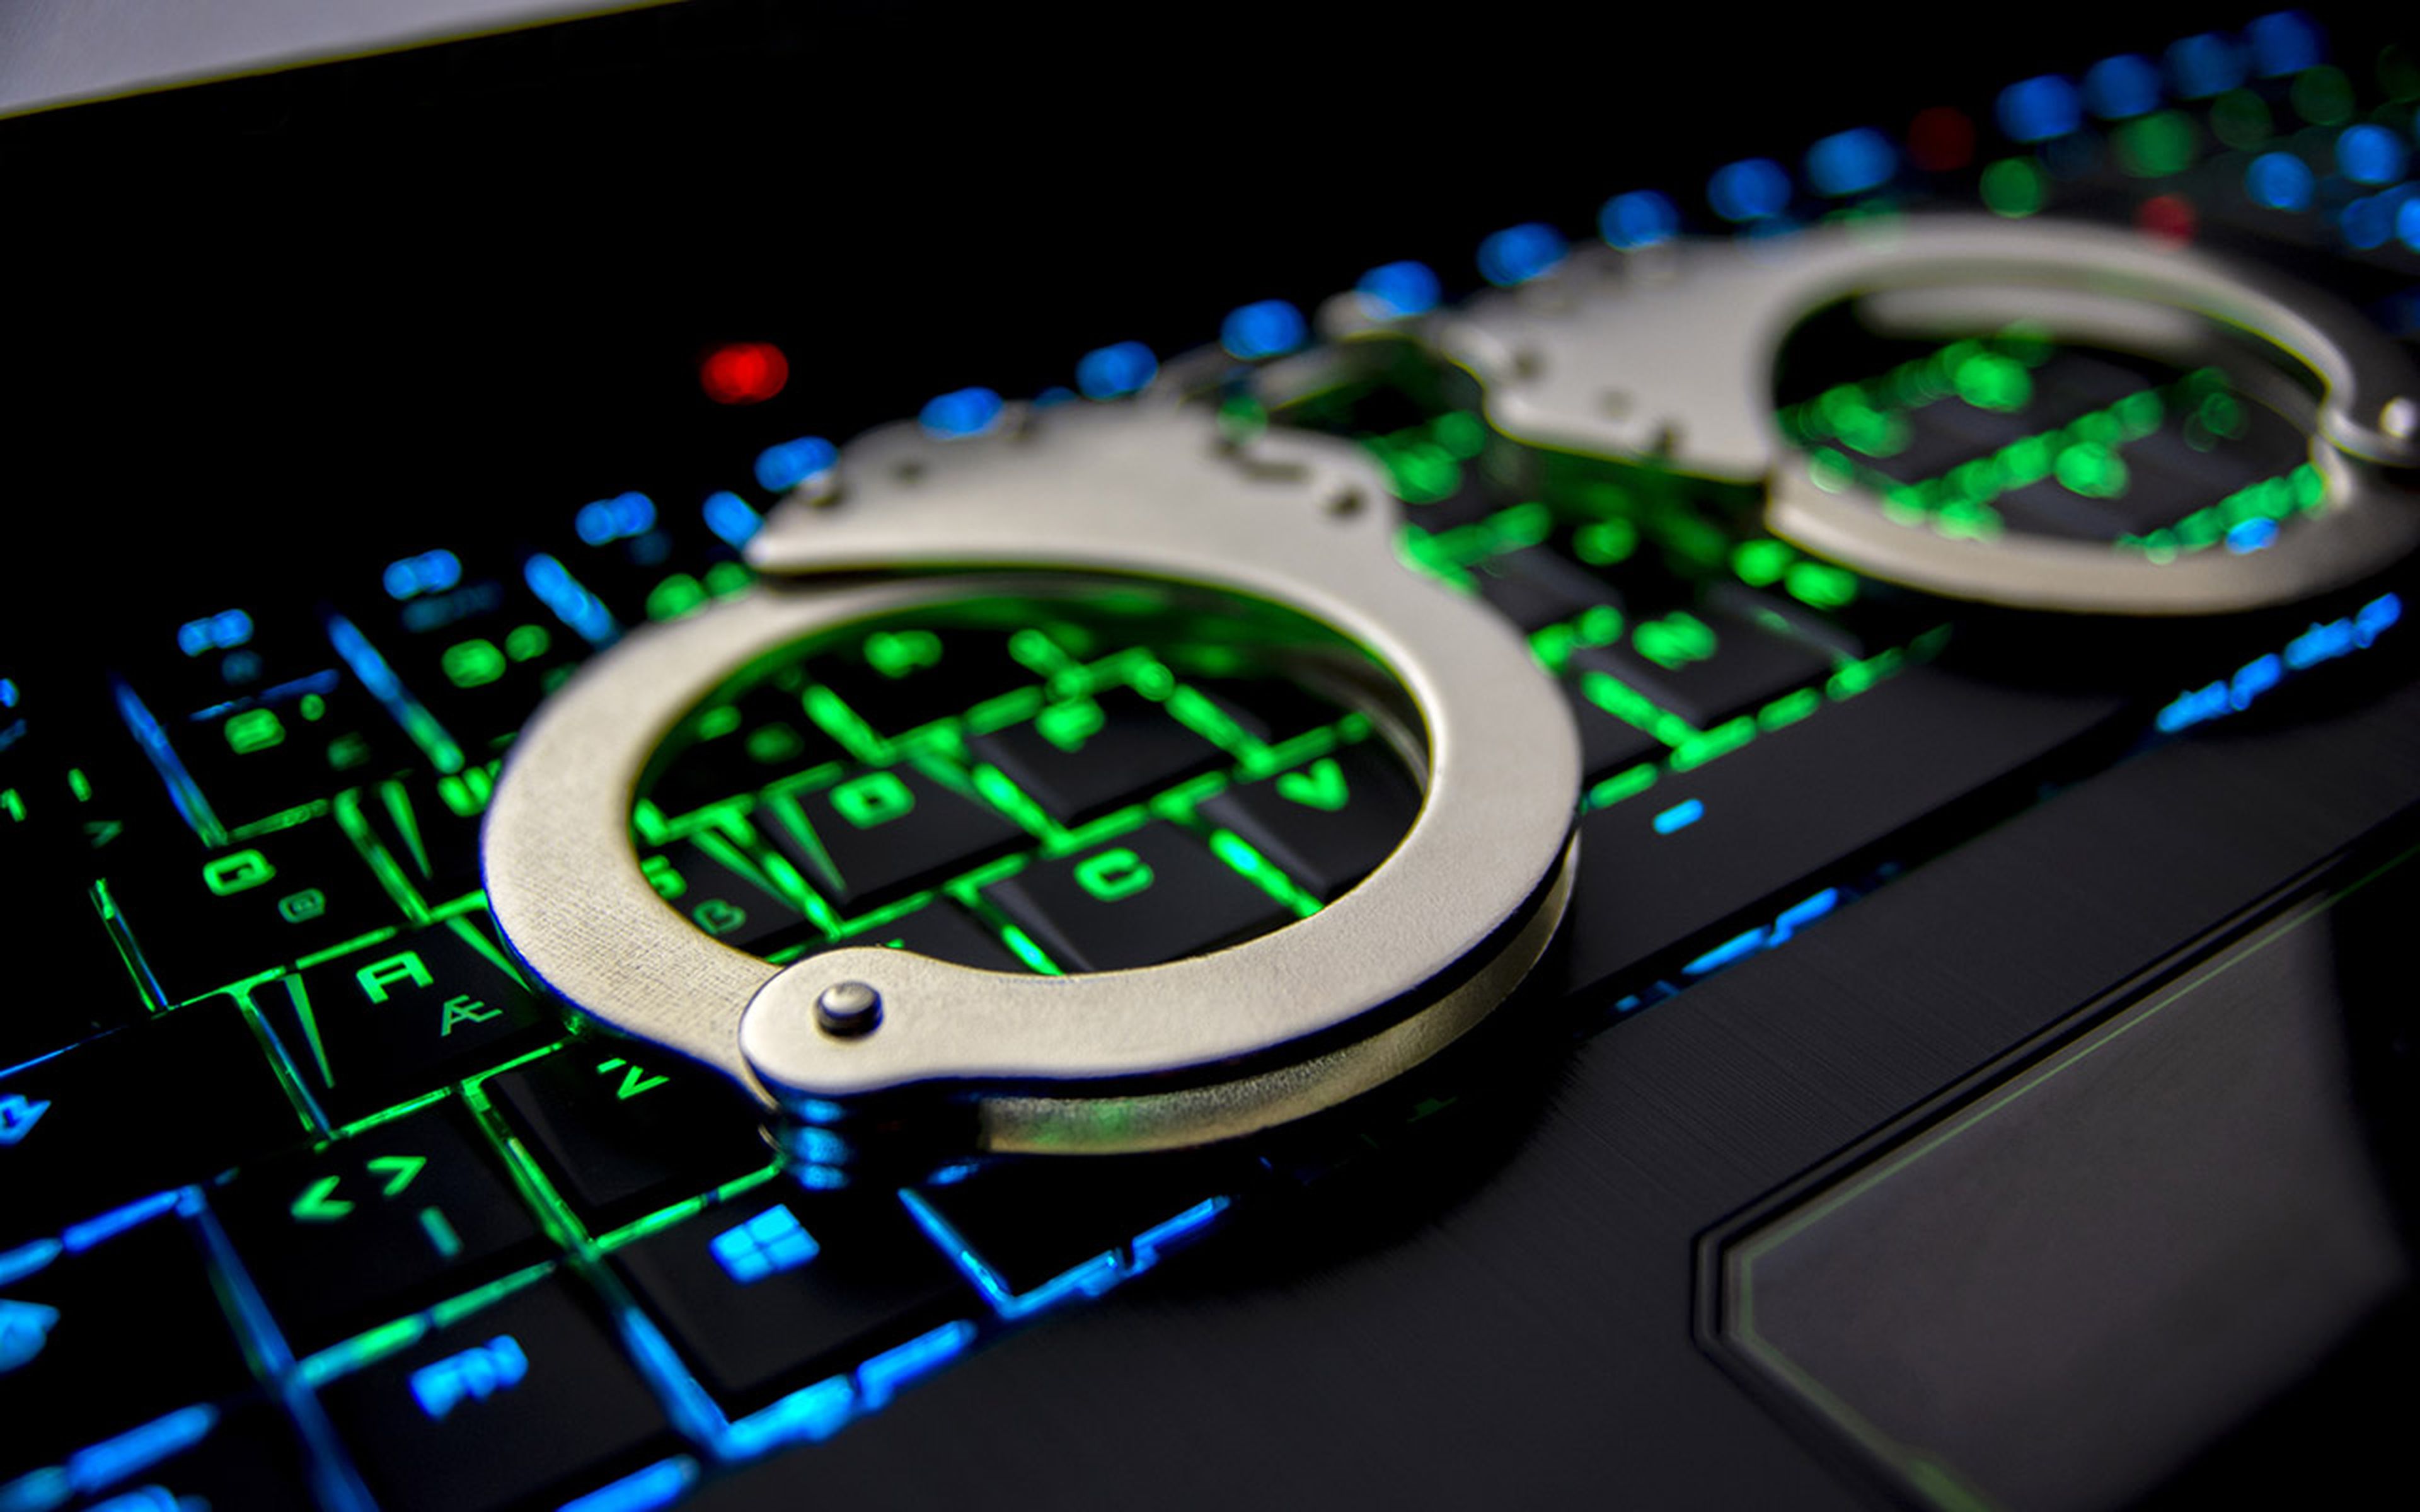 A colorful keyboard and handcuffs.